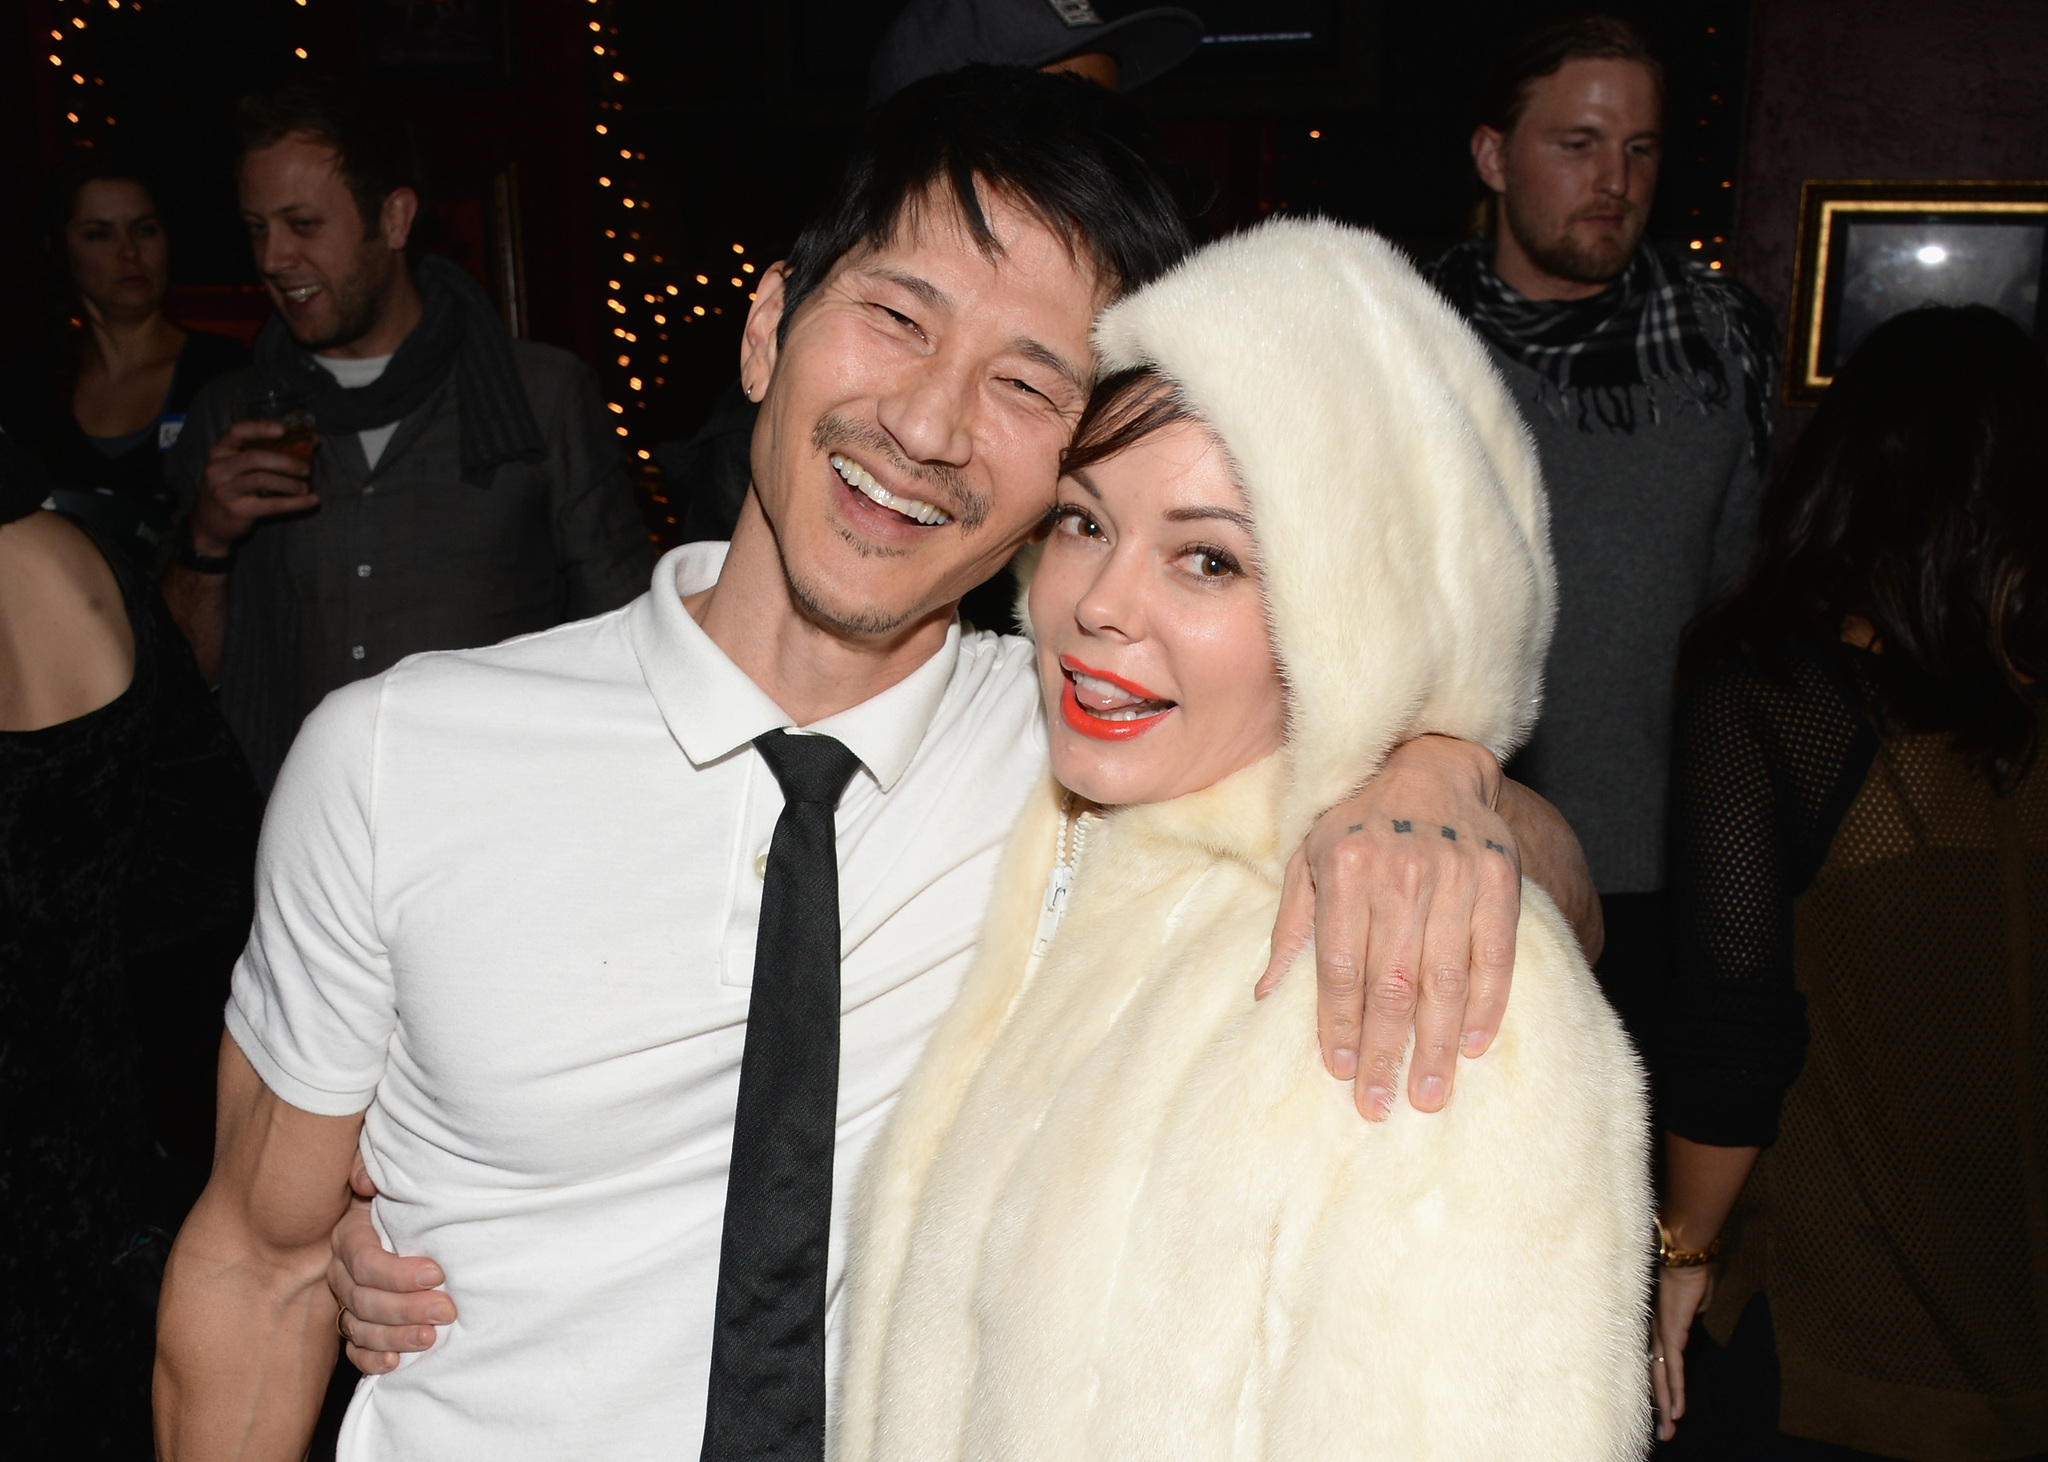 Rose McGowan and Gregg Araki at event of White Bird in a Blizzard (2014)